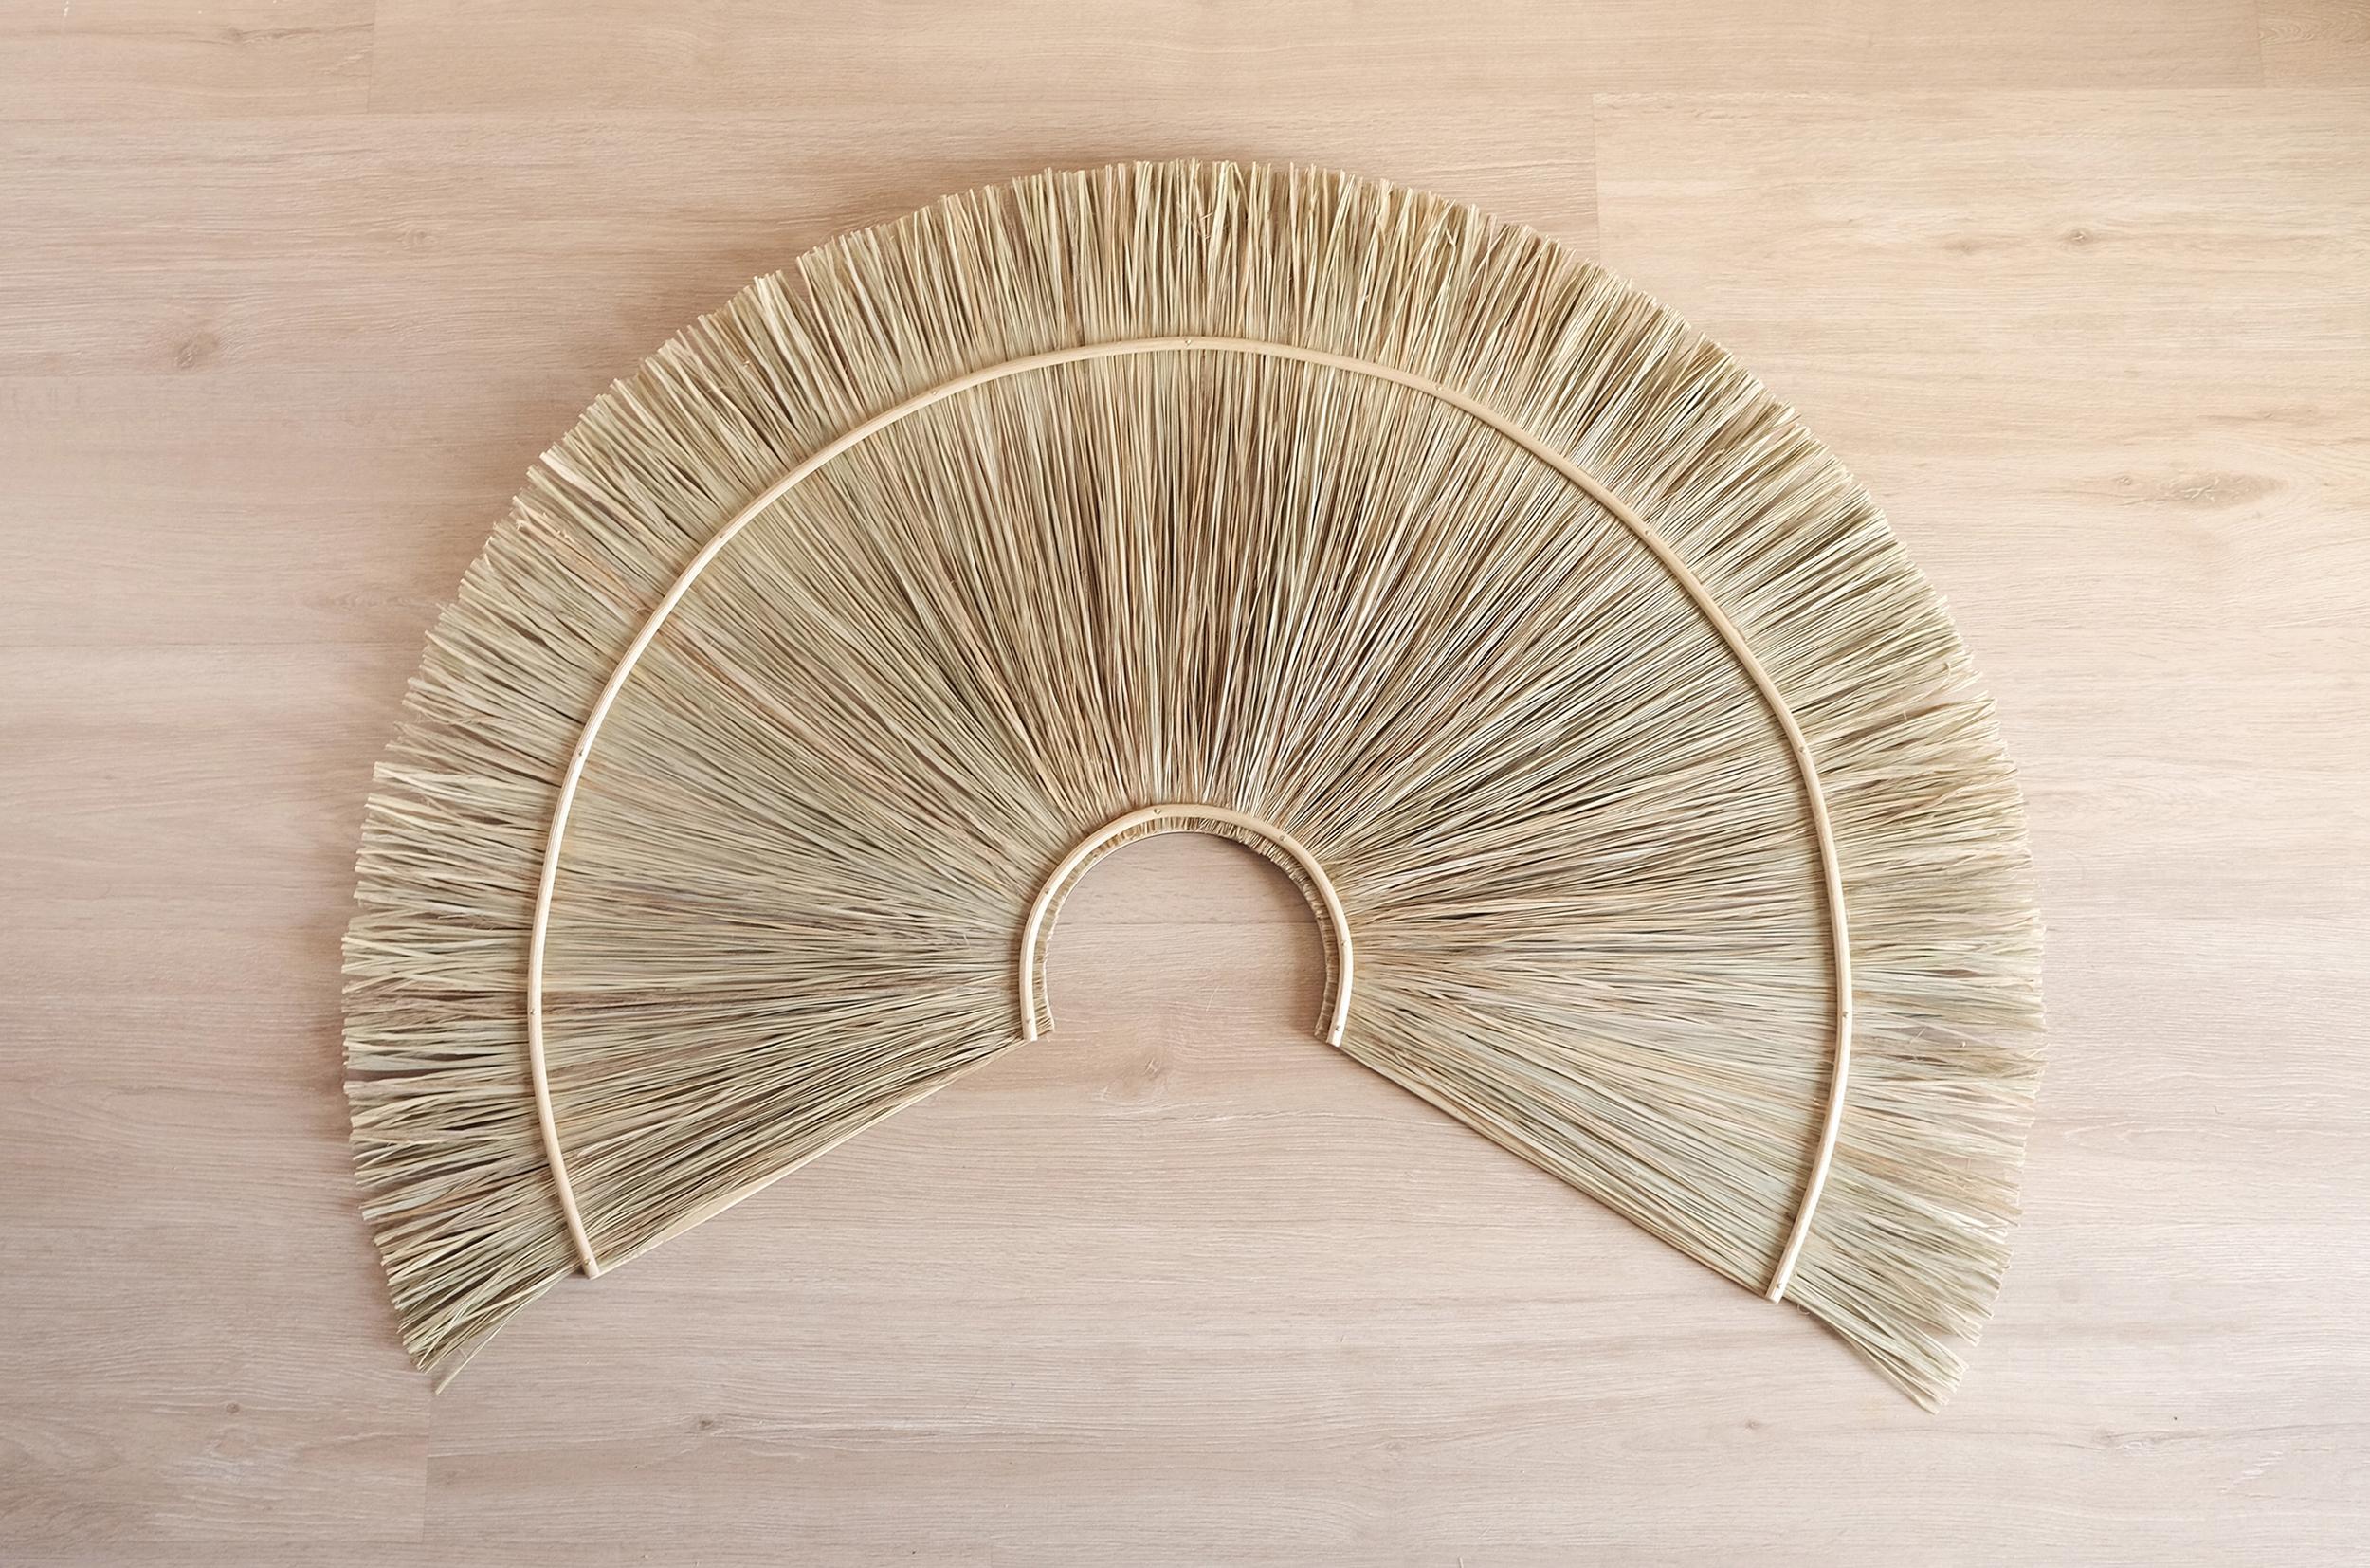 Organic Modern Figurative Wall Fan handcrafted in Spain by Gabriela de Sagarminaga. It was crafted based on the an spanish cultural object: the fan. Made with esparto grass and topped with pith on a birch wooden base, this art piece presents